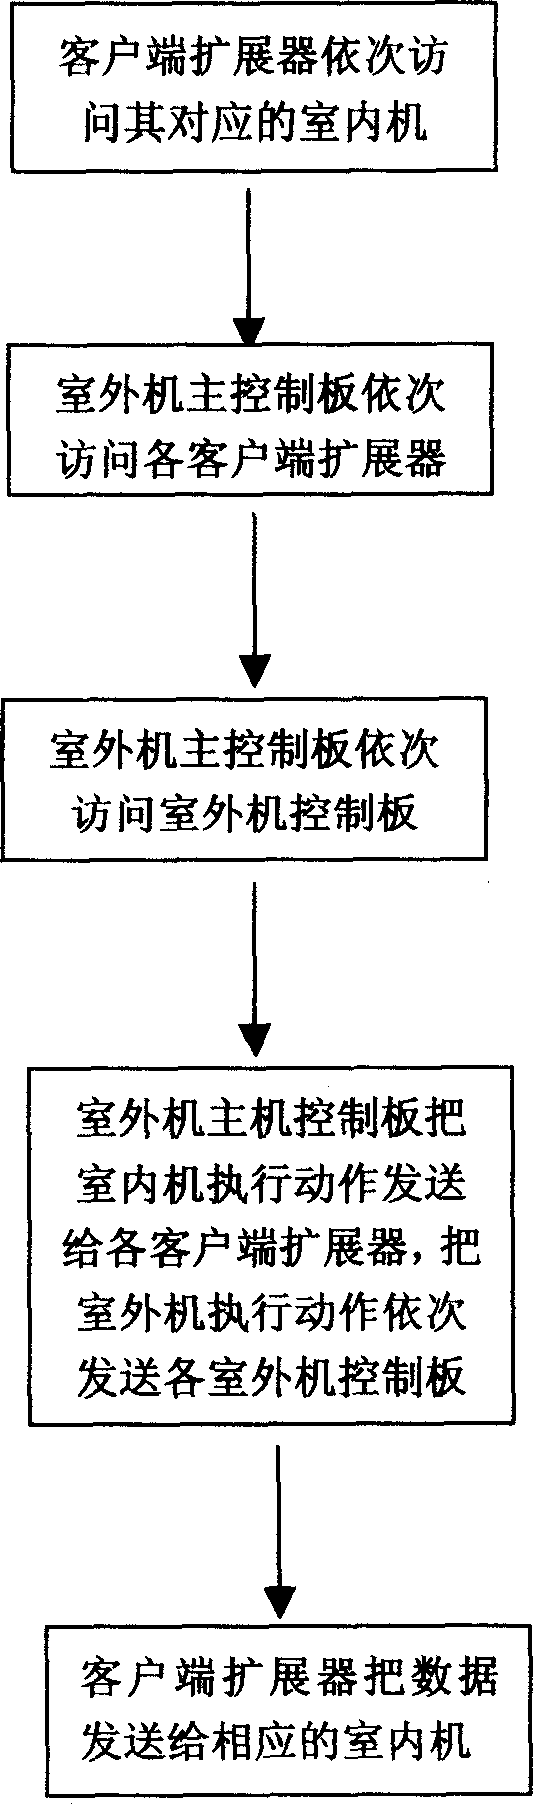 Multi-split air conditioner unit and its network communication method